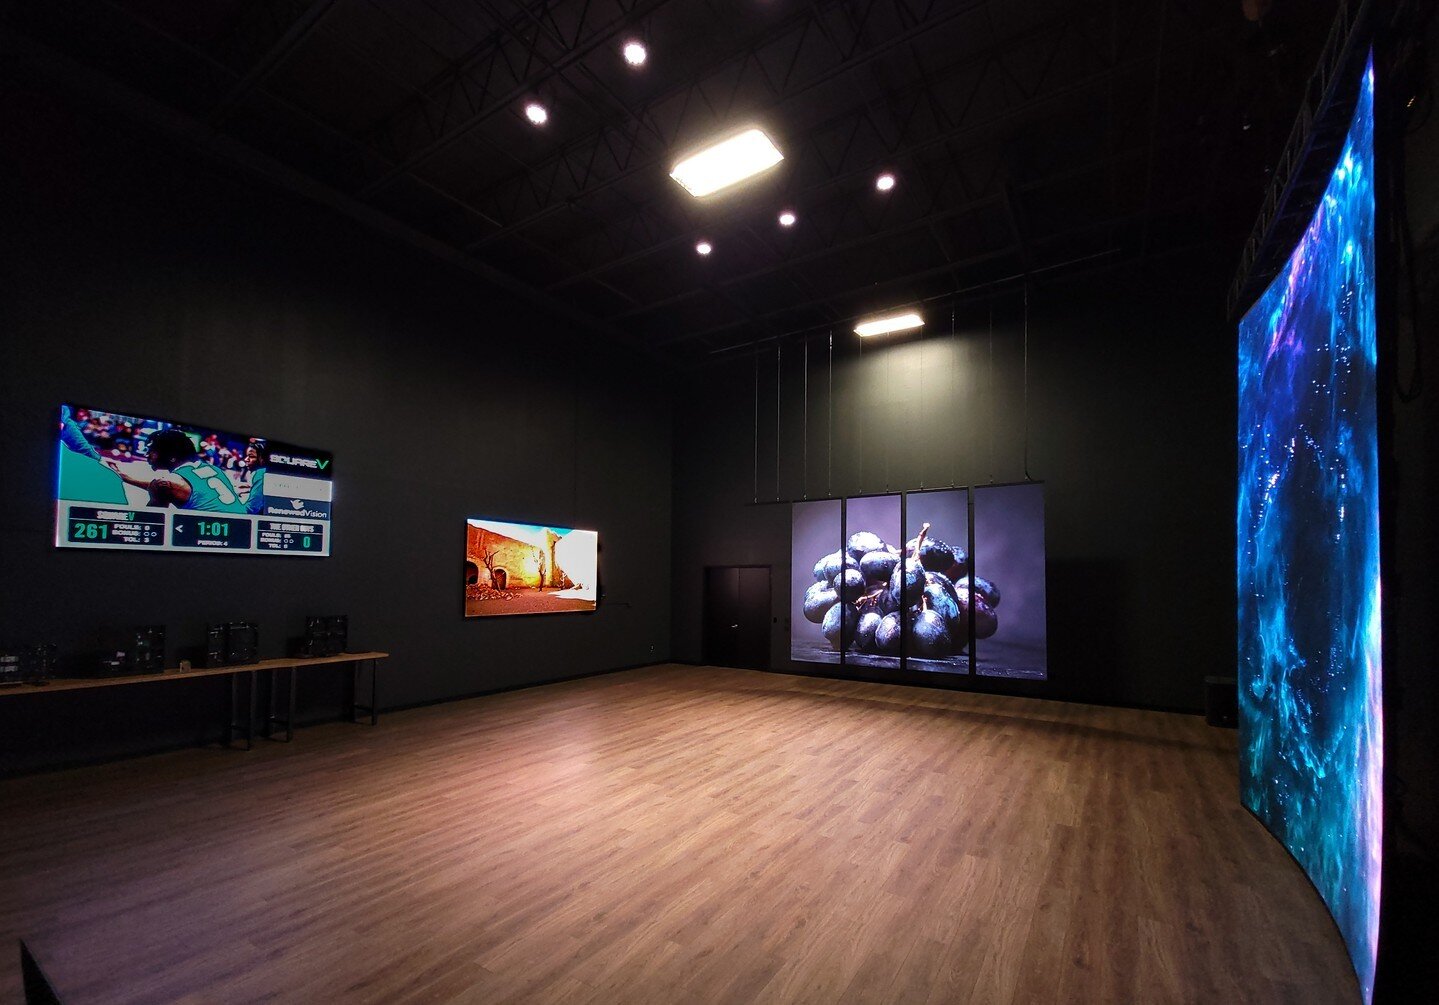 When investing in a premium LED video wall for your business, you should be able to see it in action first!

With our state-of-the-art showroom, you can see and touch every squareV product before you place an order. While you&rsquo;re here, you&rsquo